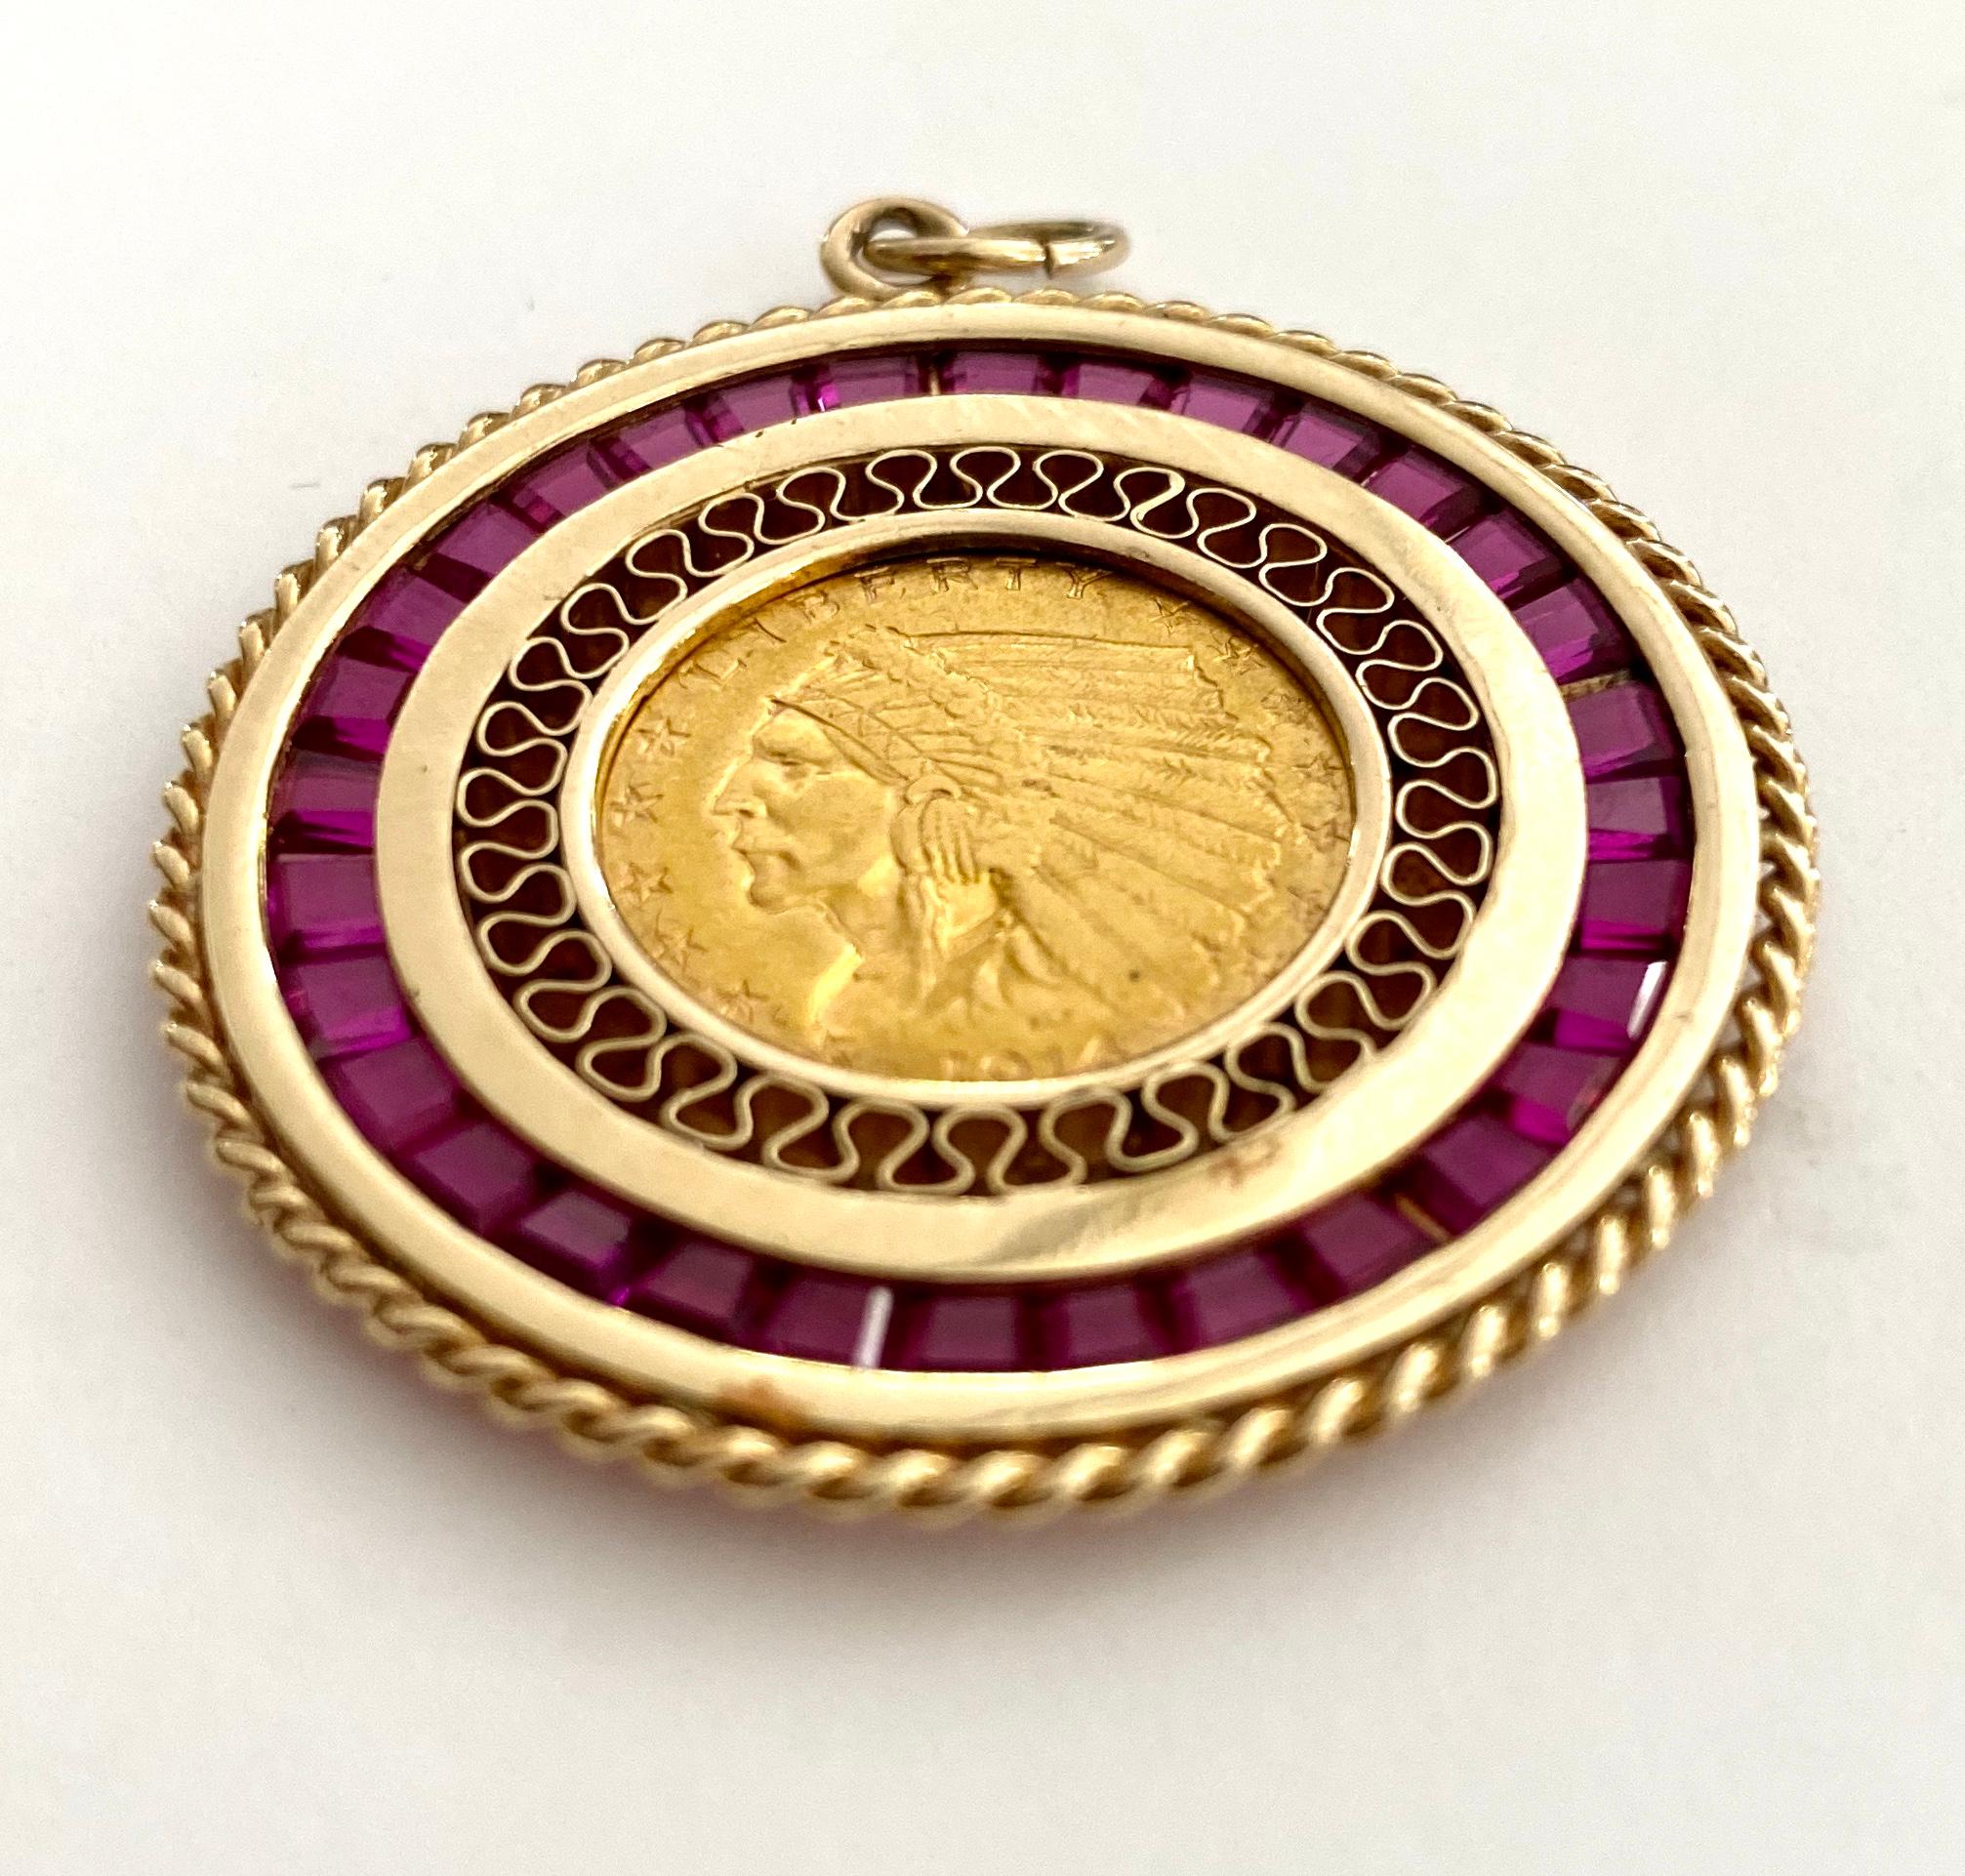 - A 10K. yellow gold pendant with a $ 2.50 and synthetic rubies
- $ 2.50 = 1914 Indians head. (original) USA.
- 32 synthetic rubies, Total weight: 14.95 grams, diameter of the pendant: 37 mm, thick 2 mm.